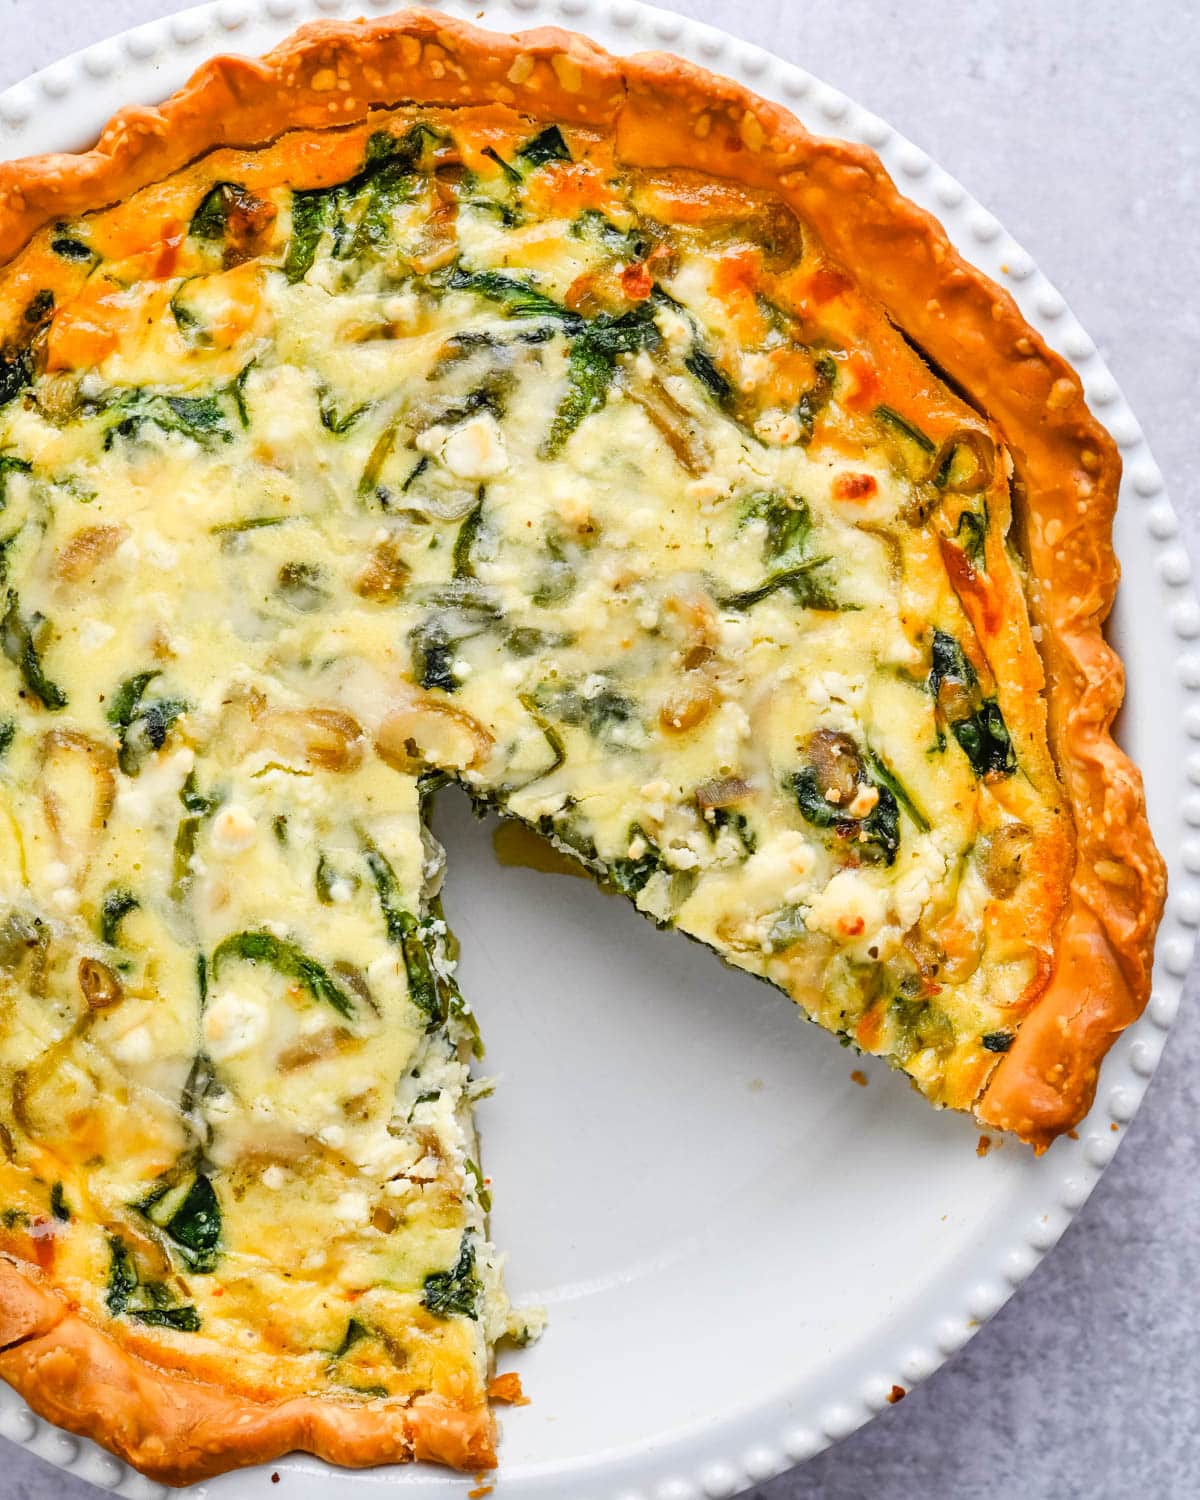 Spinach goat cheese quiche in a baking dish.